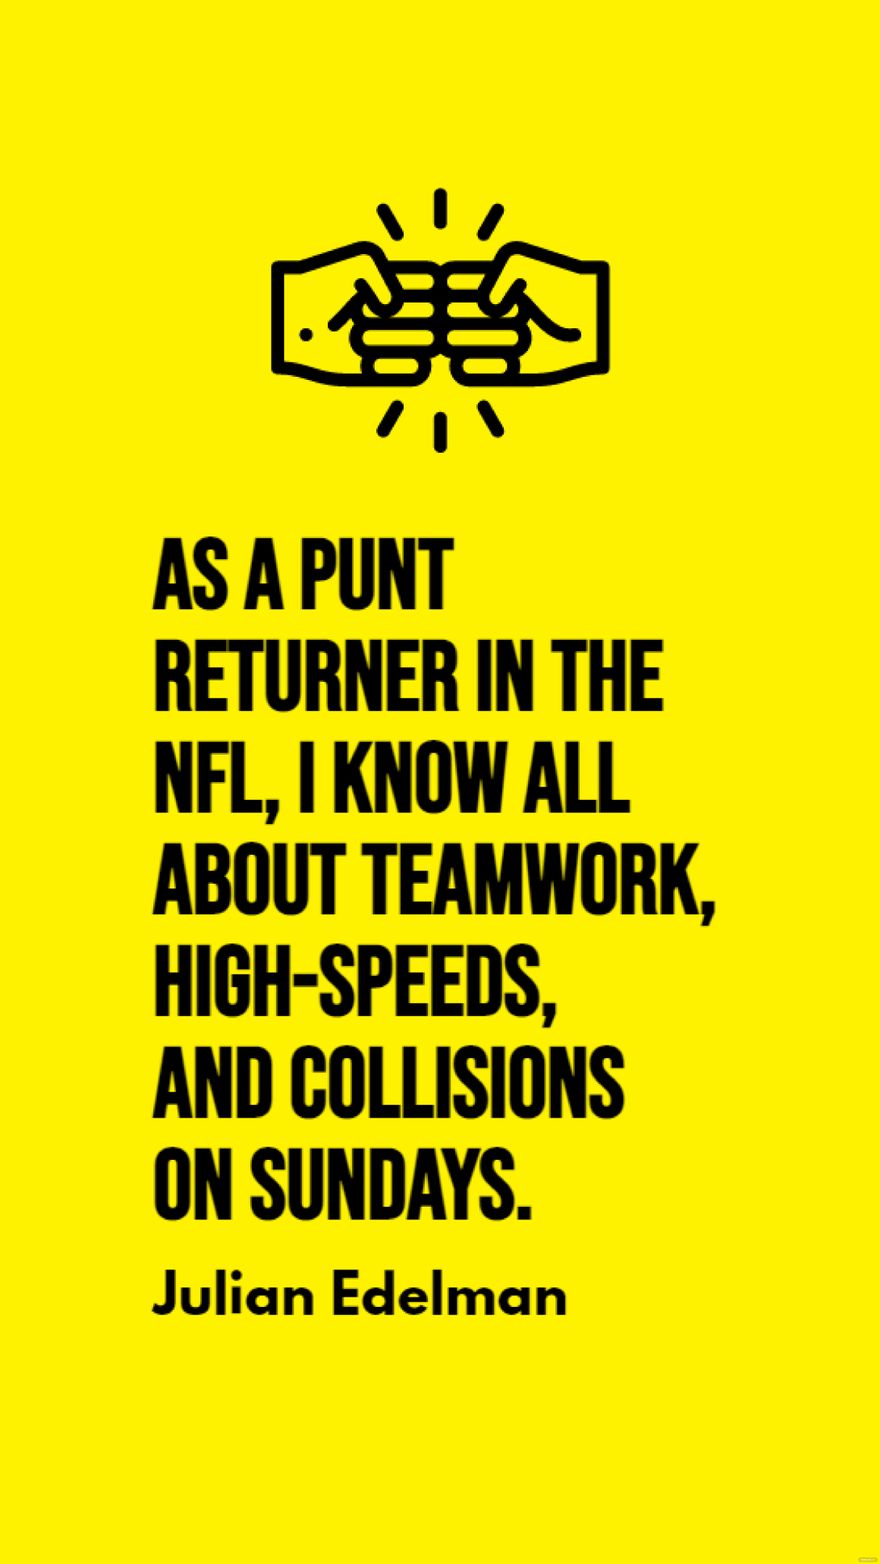 Free Julian Edelman - As a punt returner in the NFL, I know all about teamwork, high-speeds, and collisions on Sundays.